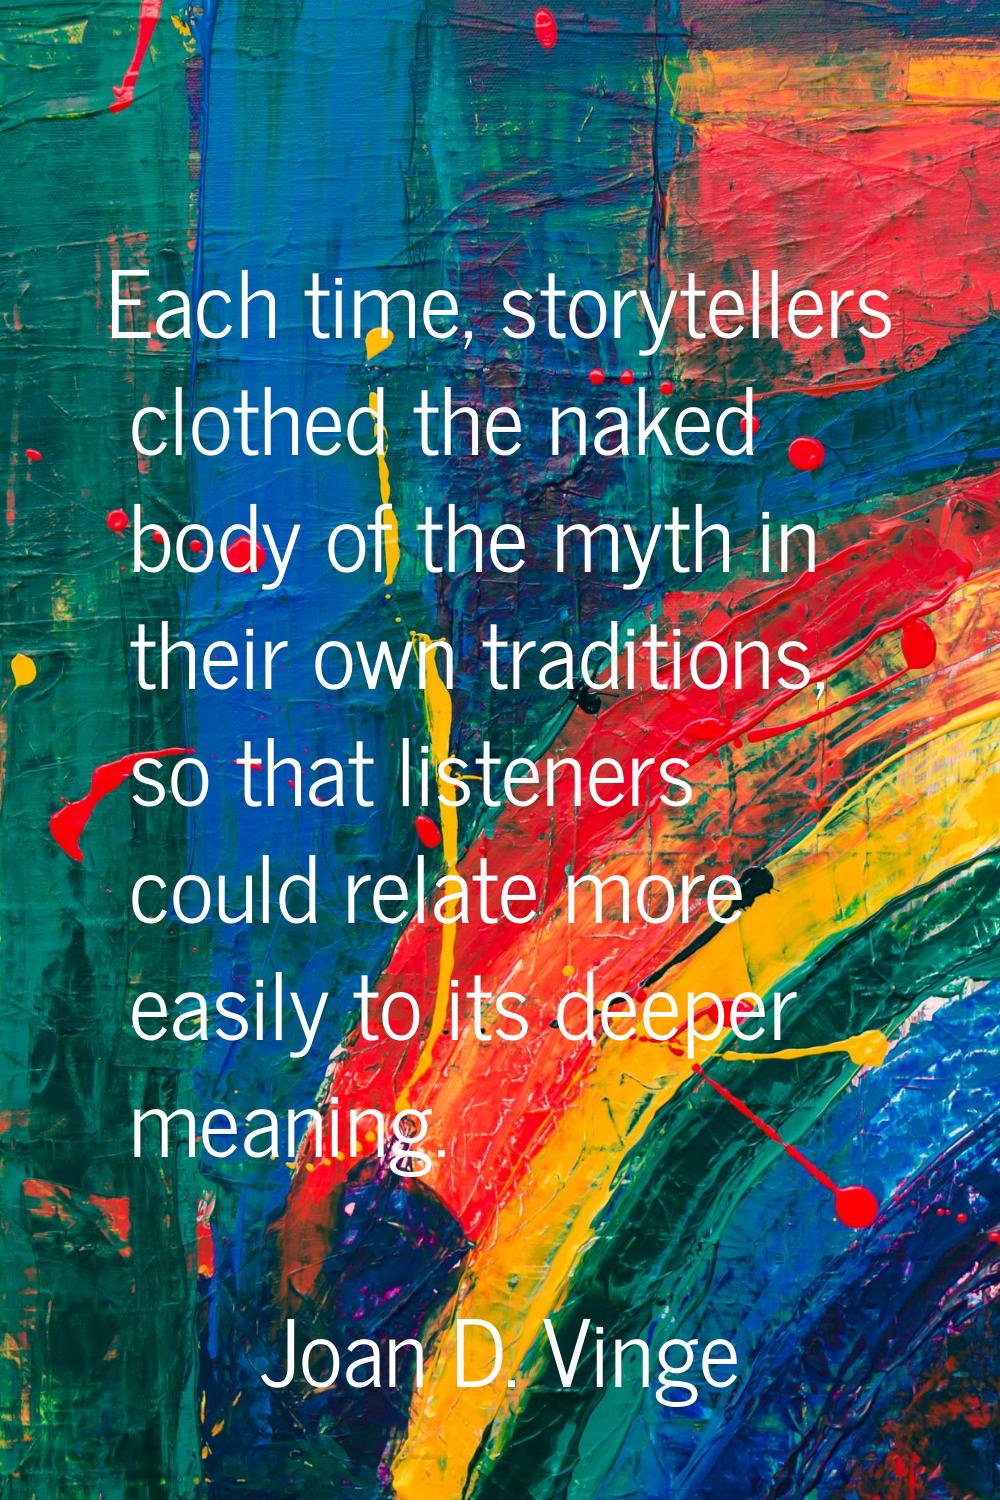 Each time, storytellers clothed the naked body of the myth in their own traditions, so that listene